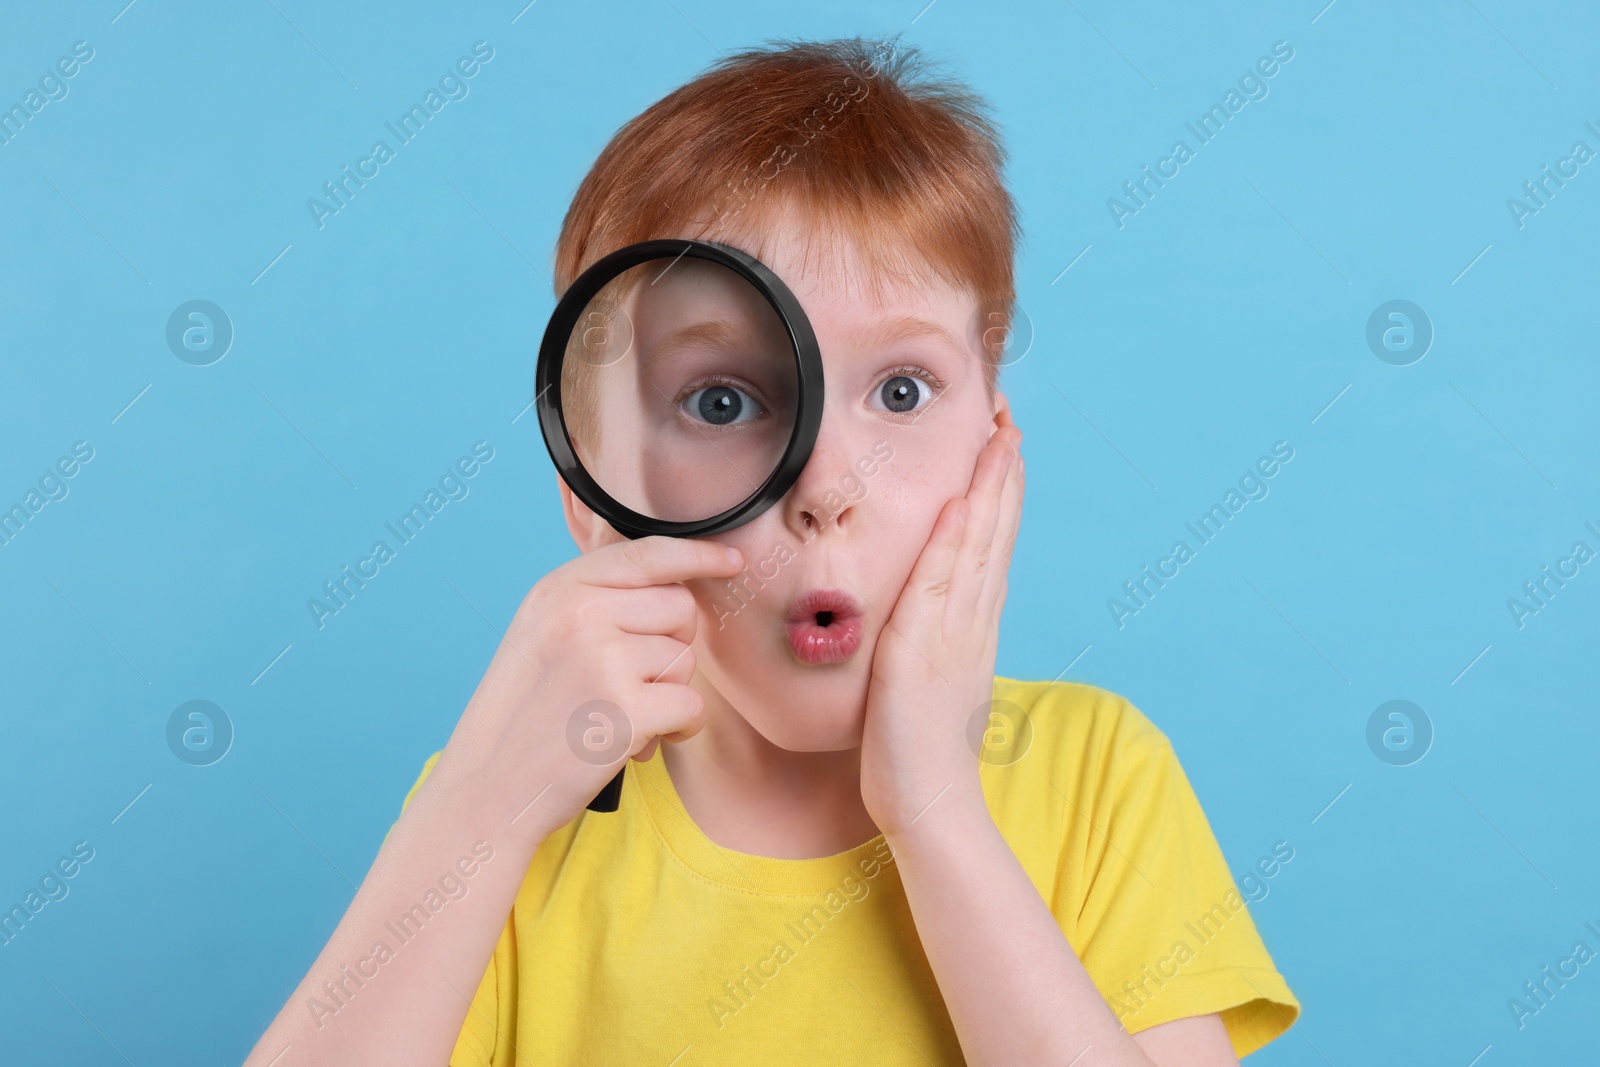 Photo of Surprised boy looking through magnifier glass on light blue background